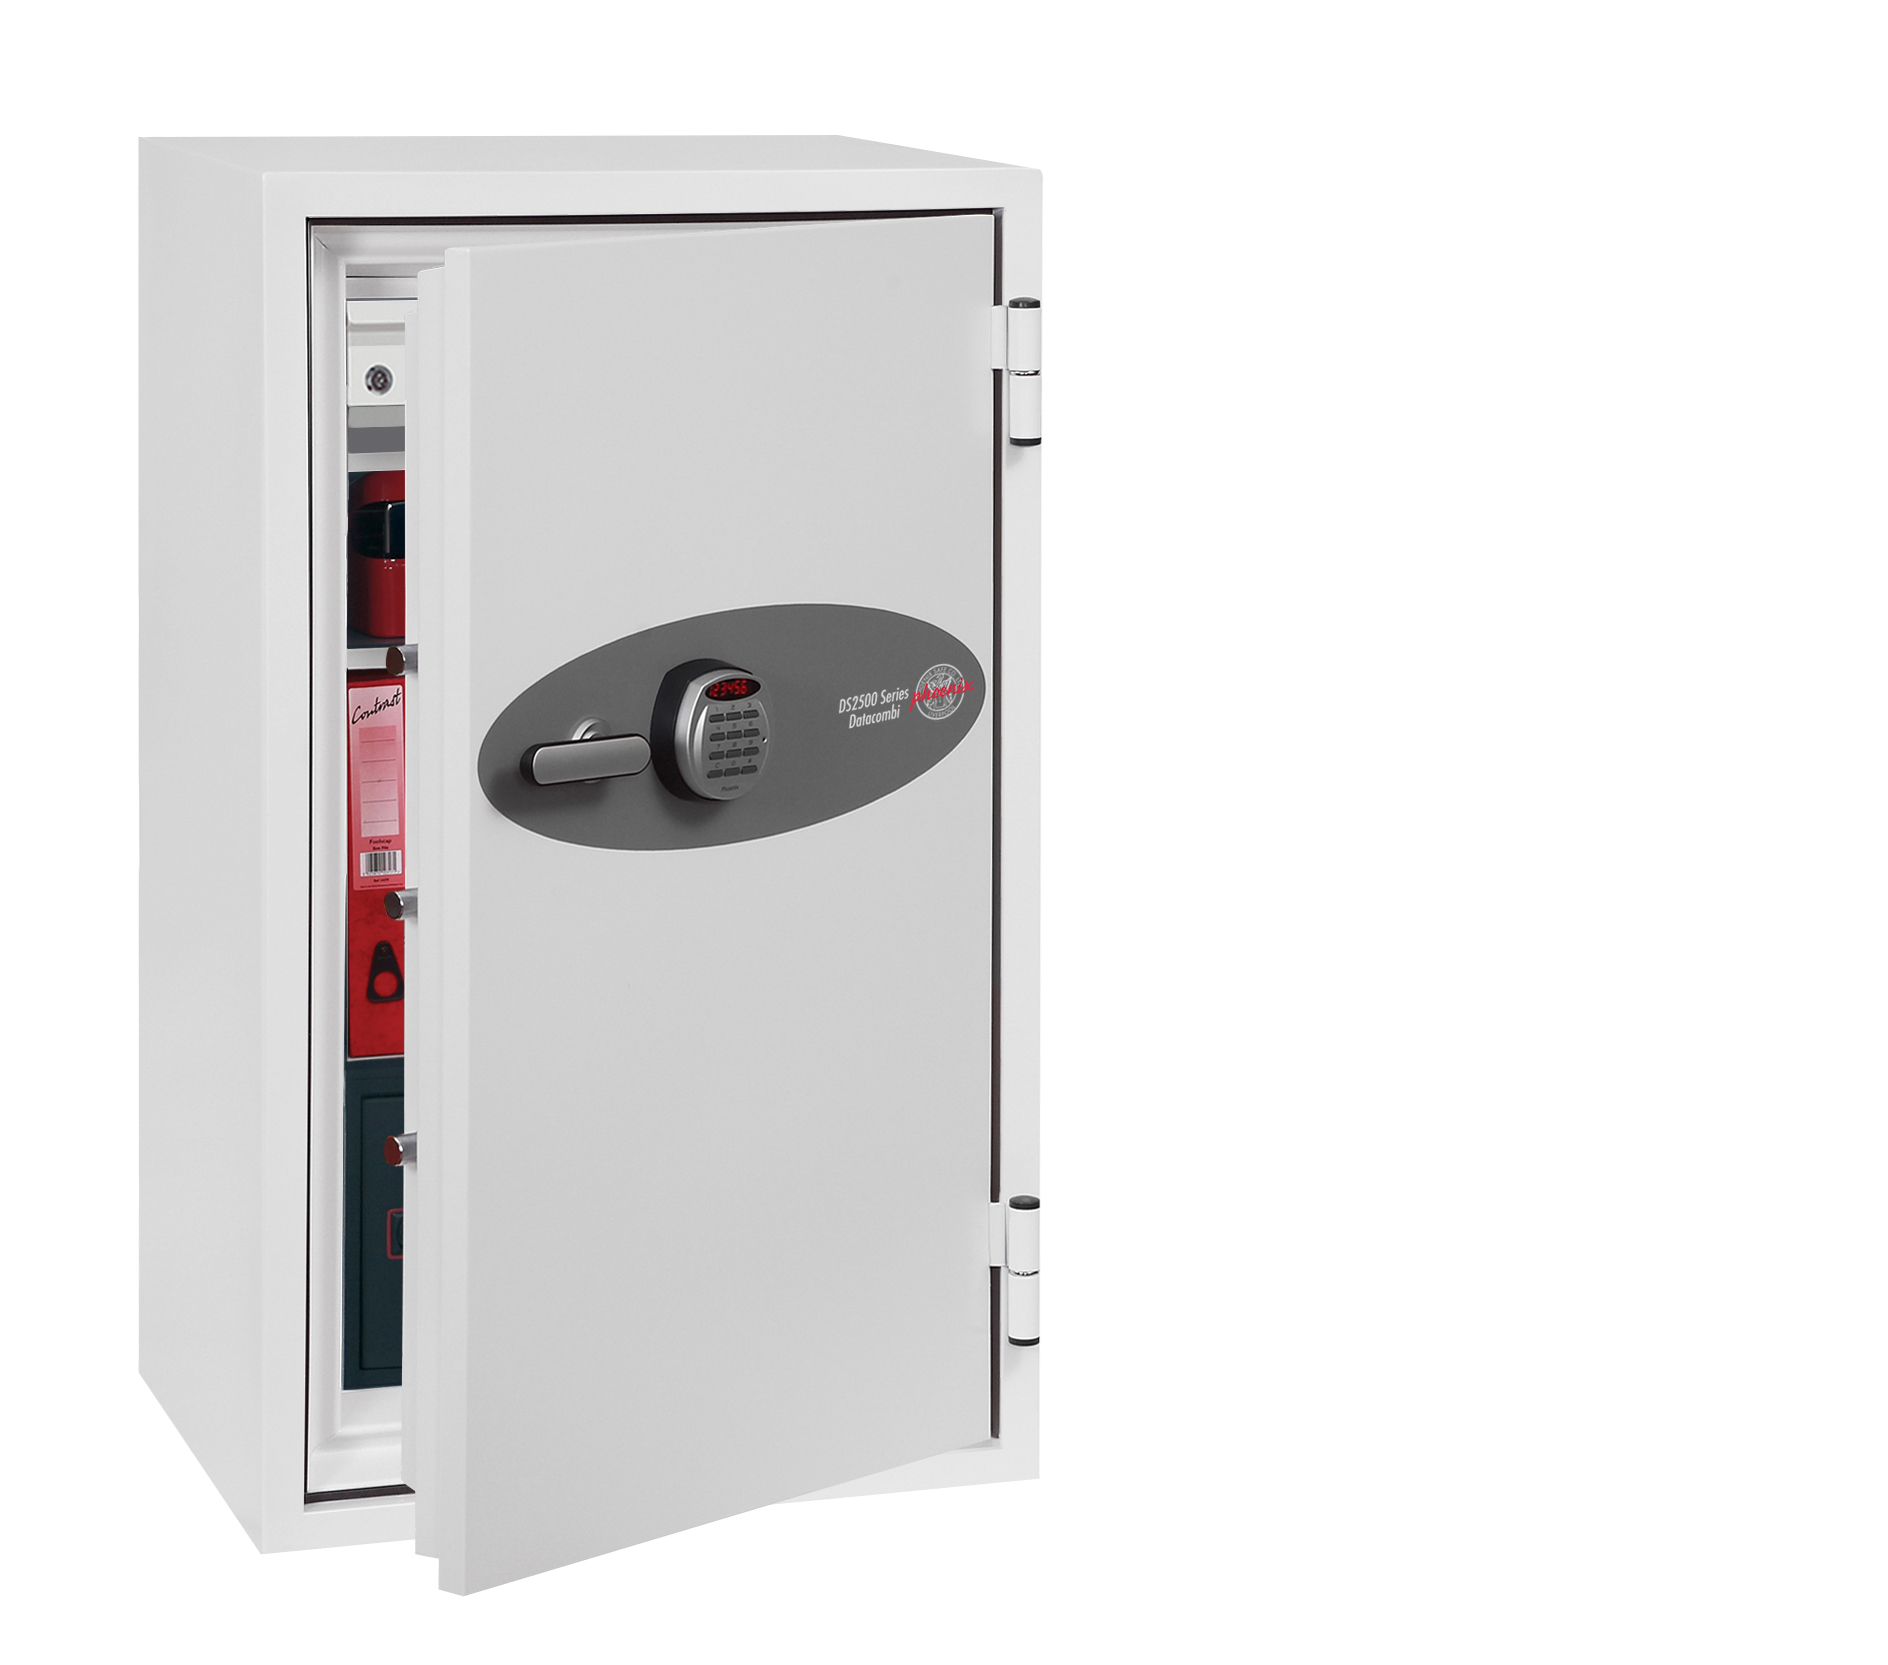 The Phoenix Safe Data Combi DS2504E data media fire safe or safe for the home offers protection for digital media, paper records, cash and valuables. Its almost 4 feet tall and can be base fixed to a floor with its provided bolts. The door features a high security advanced electronic code lock.